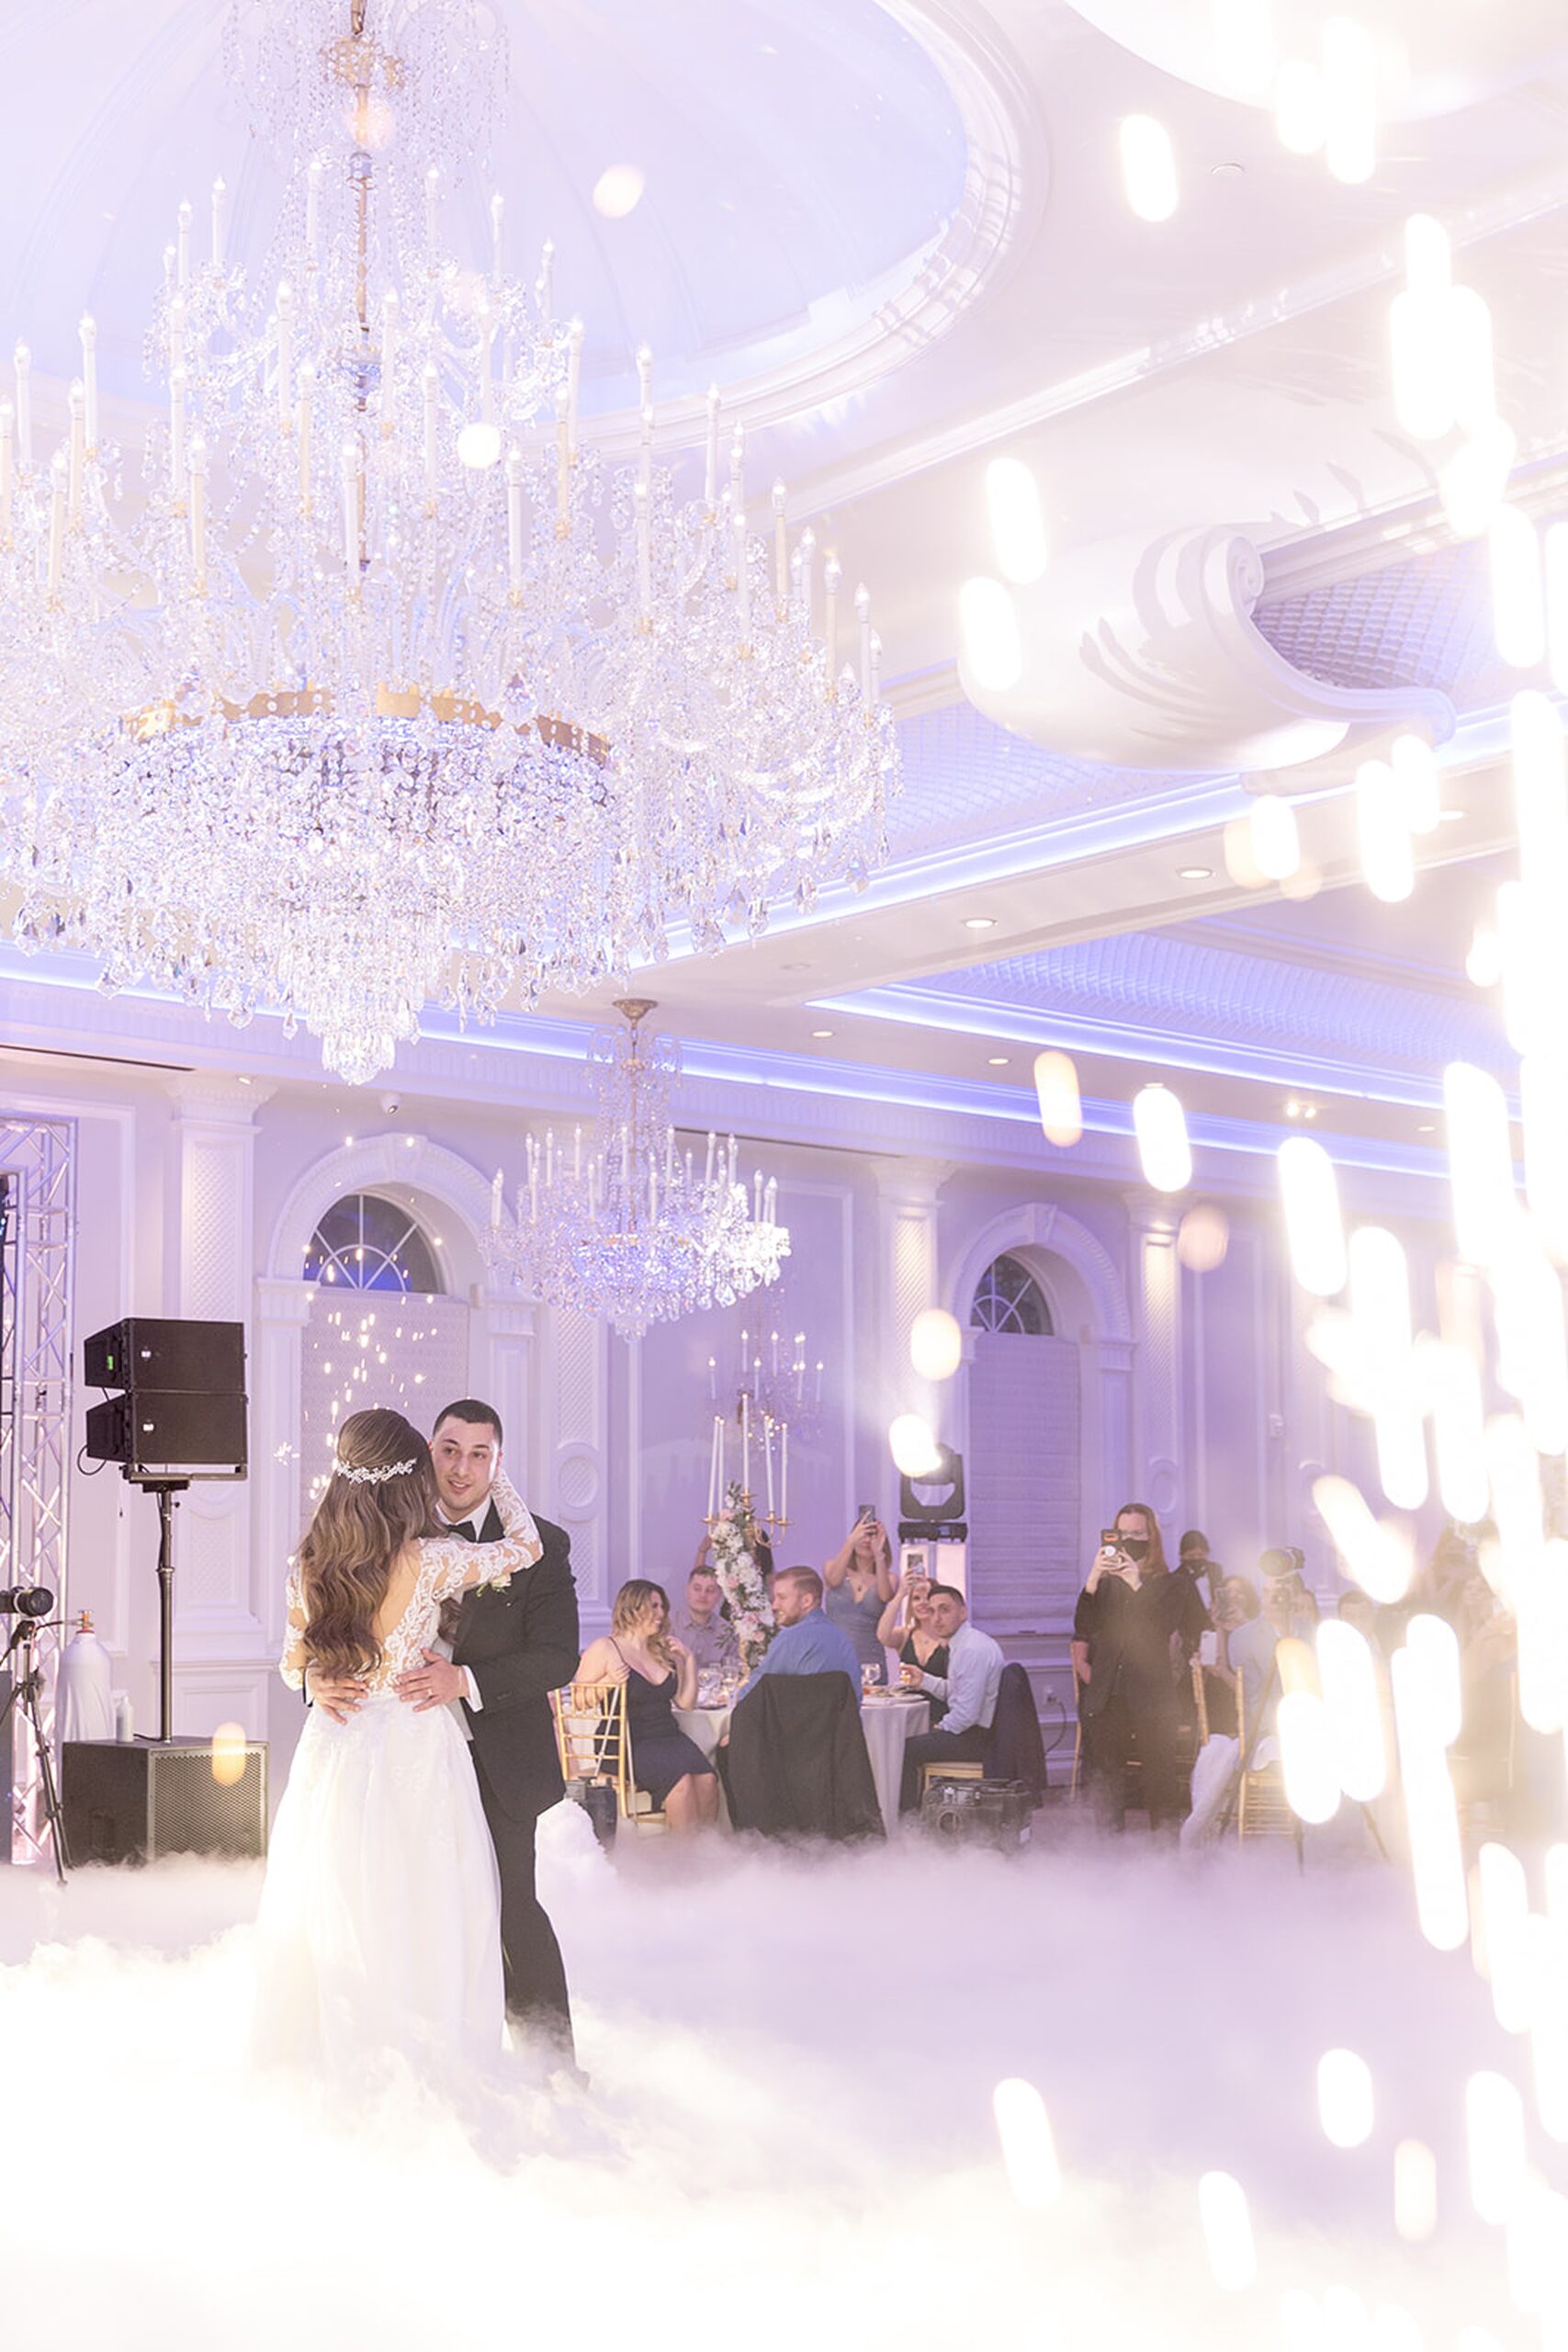 Newlyweds dance under crystal chandeliers as ground fog and fireworks go off at the rockleigh wedding venue